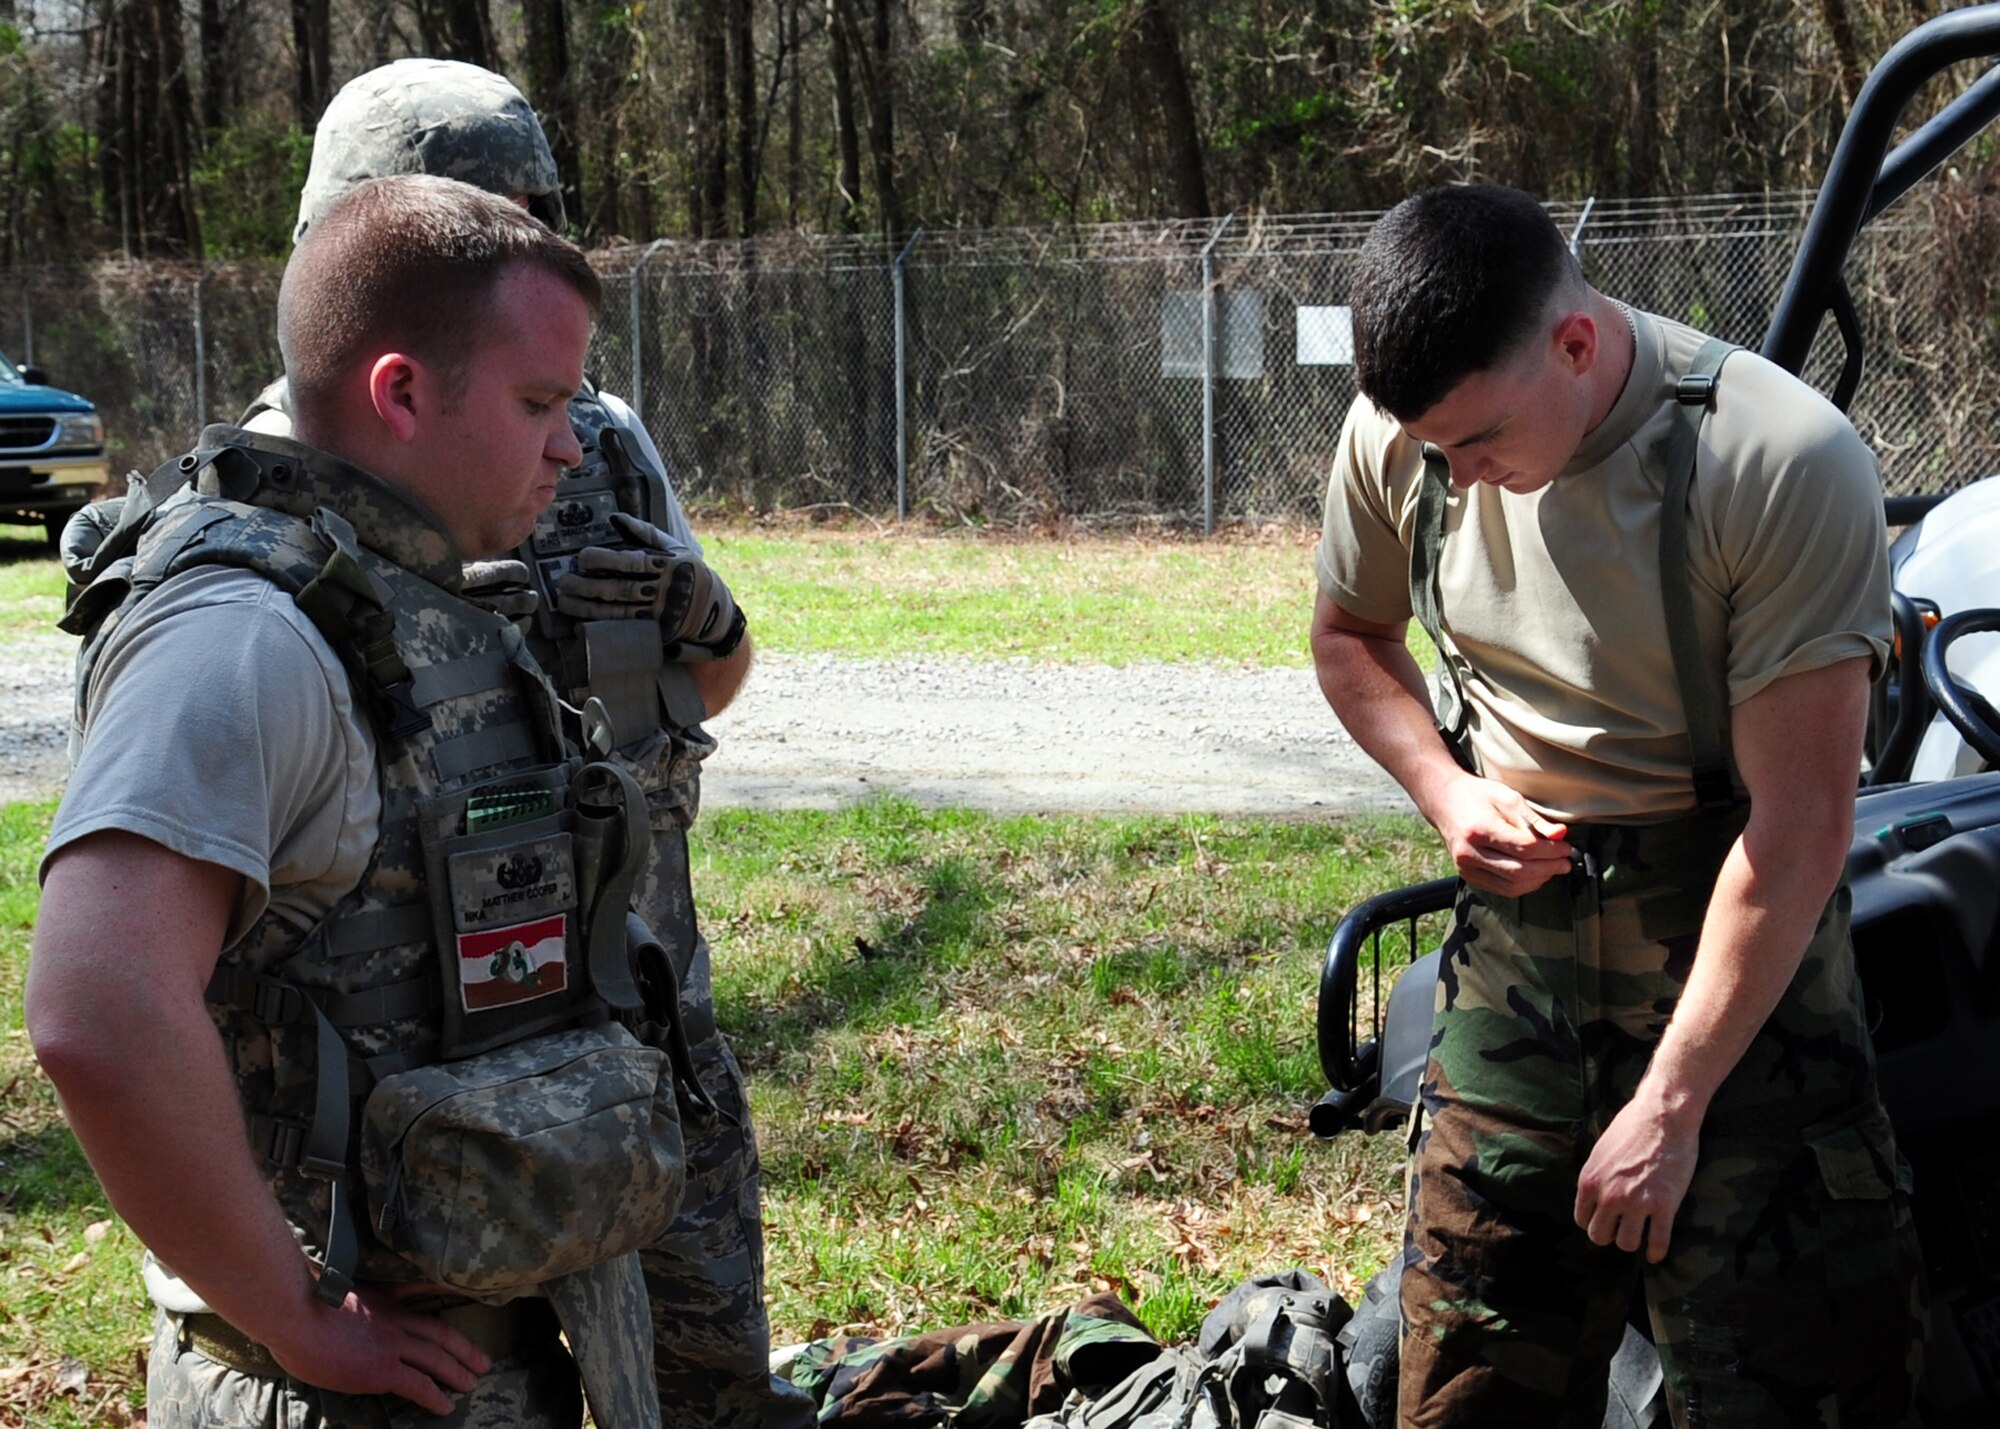 Staff Sgt. Matthew Cooper (left) supervises Senior Airman Cooper Gibson as he dons his chemical warfare gear for a training exercise on Seymour Johnson Air Force Base, N.C., March 19, 2009. As the team leader for the exercise, Sergeant Cooper ensures his team locates, identifies and disposes of a chemical hazard in a safe and timely manner. Both Airmen are explosive ordnance disposal specialists with the 4th Civil Engineer Squadron. (U.S. Air Force Photo by Airman 1st Class Rae Perry)